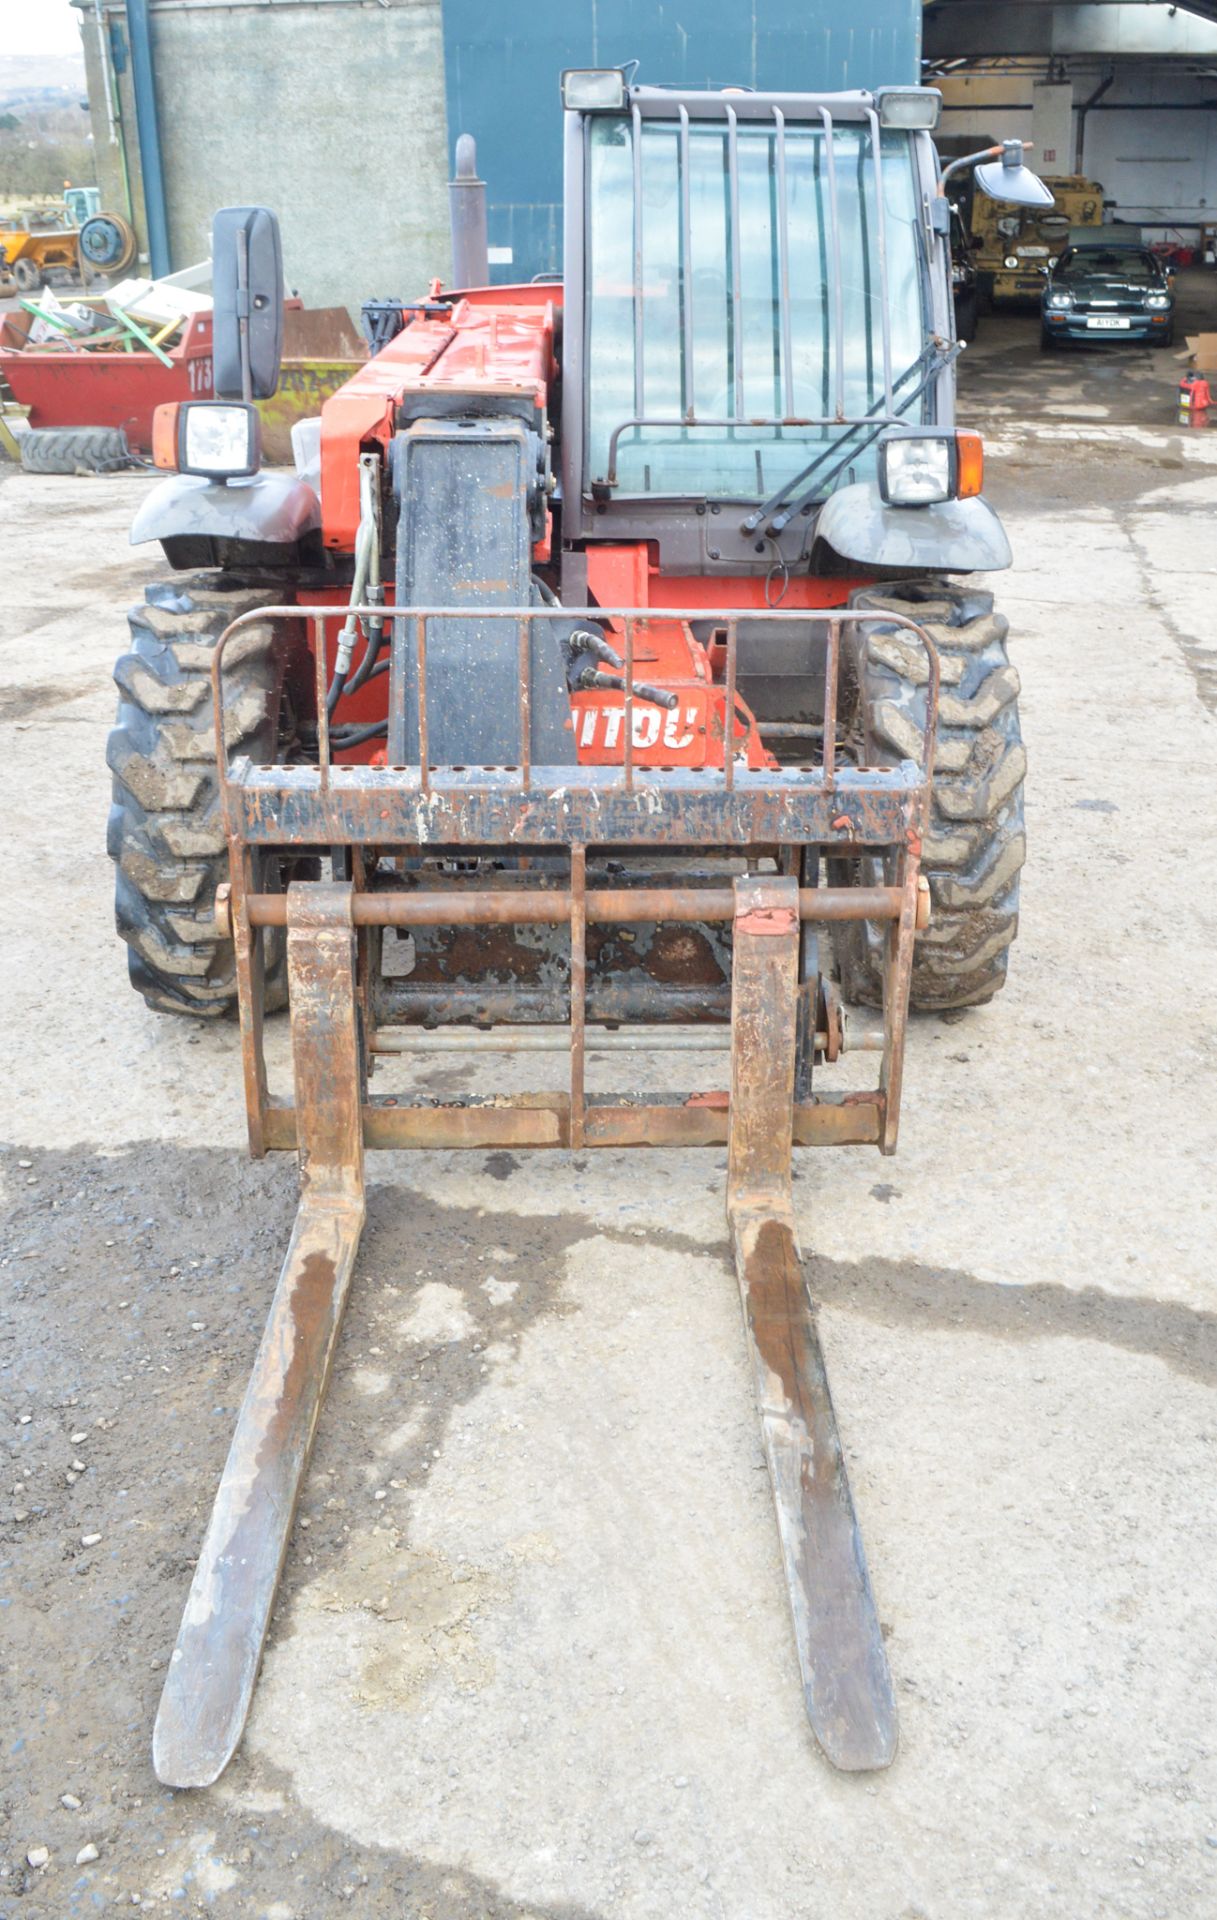 Manitou MT523 Turbo 5 metre telescopic handler Year: 2007 S/N: 245597 Recorded Hours: 4390 - Image 5 of 13